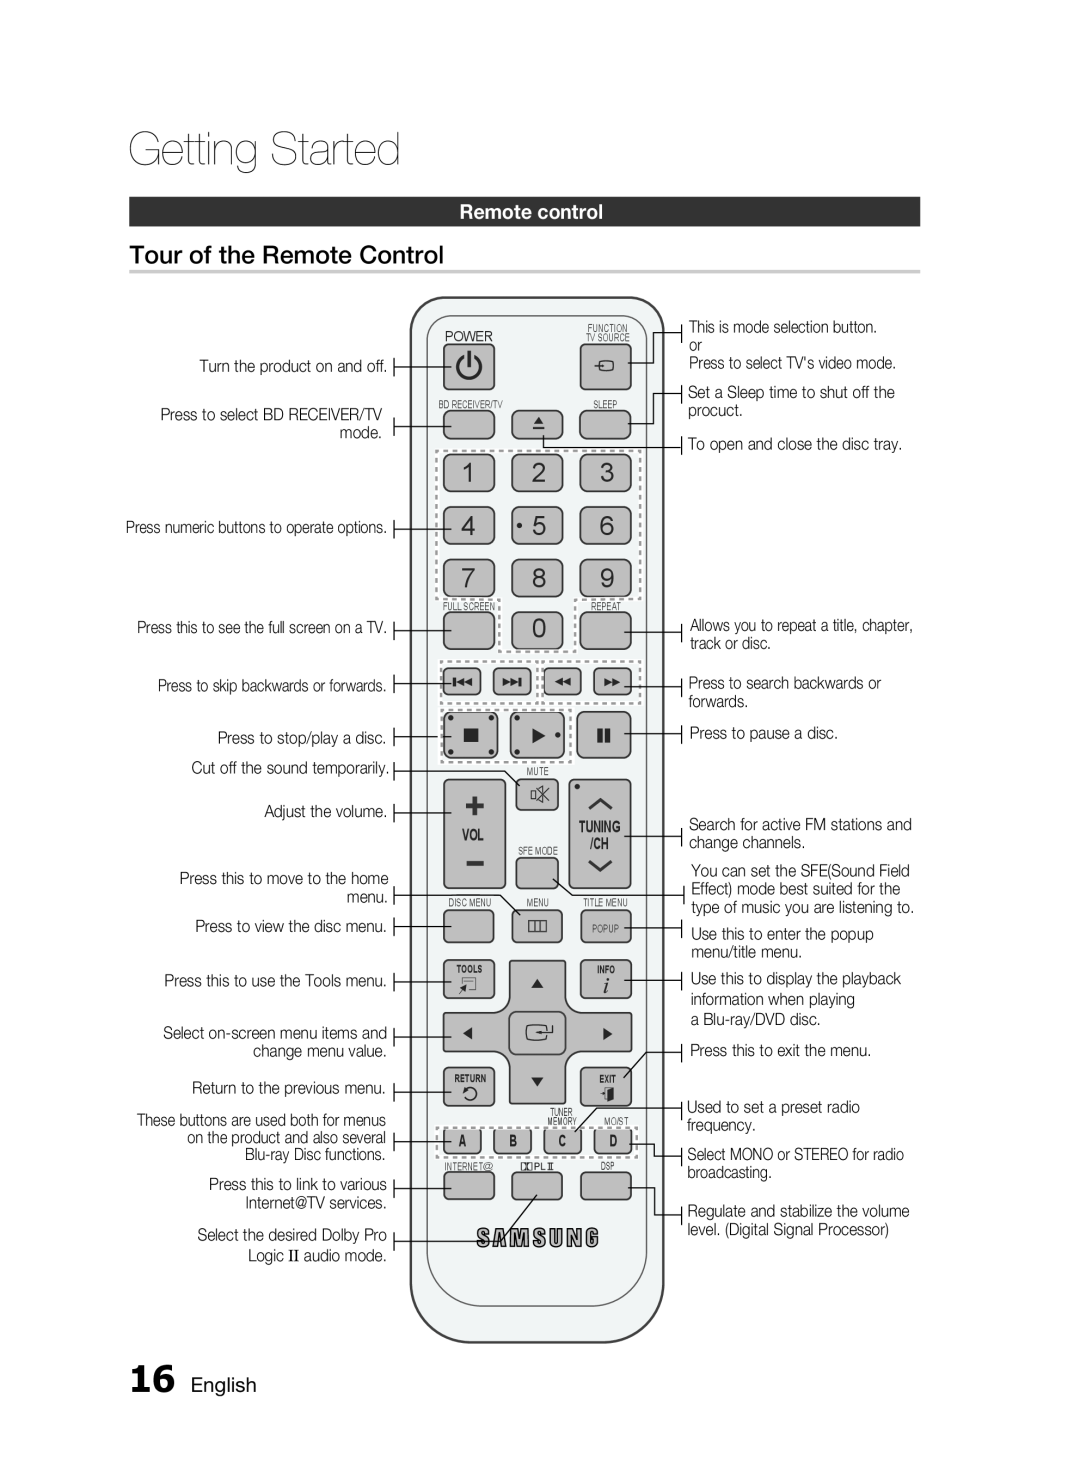 Samsung HT-C5500, AH68-02258S user manual Tour of the Remote Control, Remote control, Getting Started 